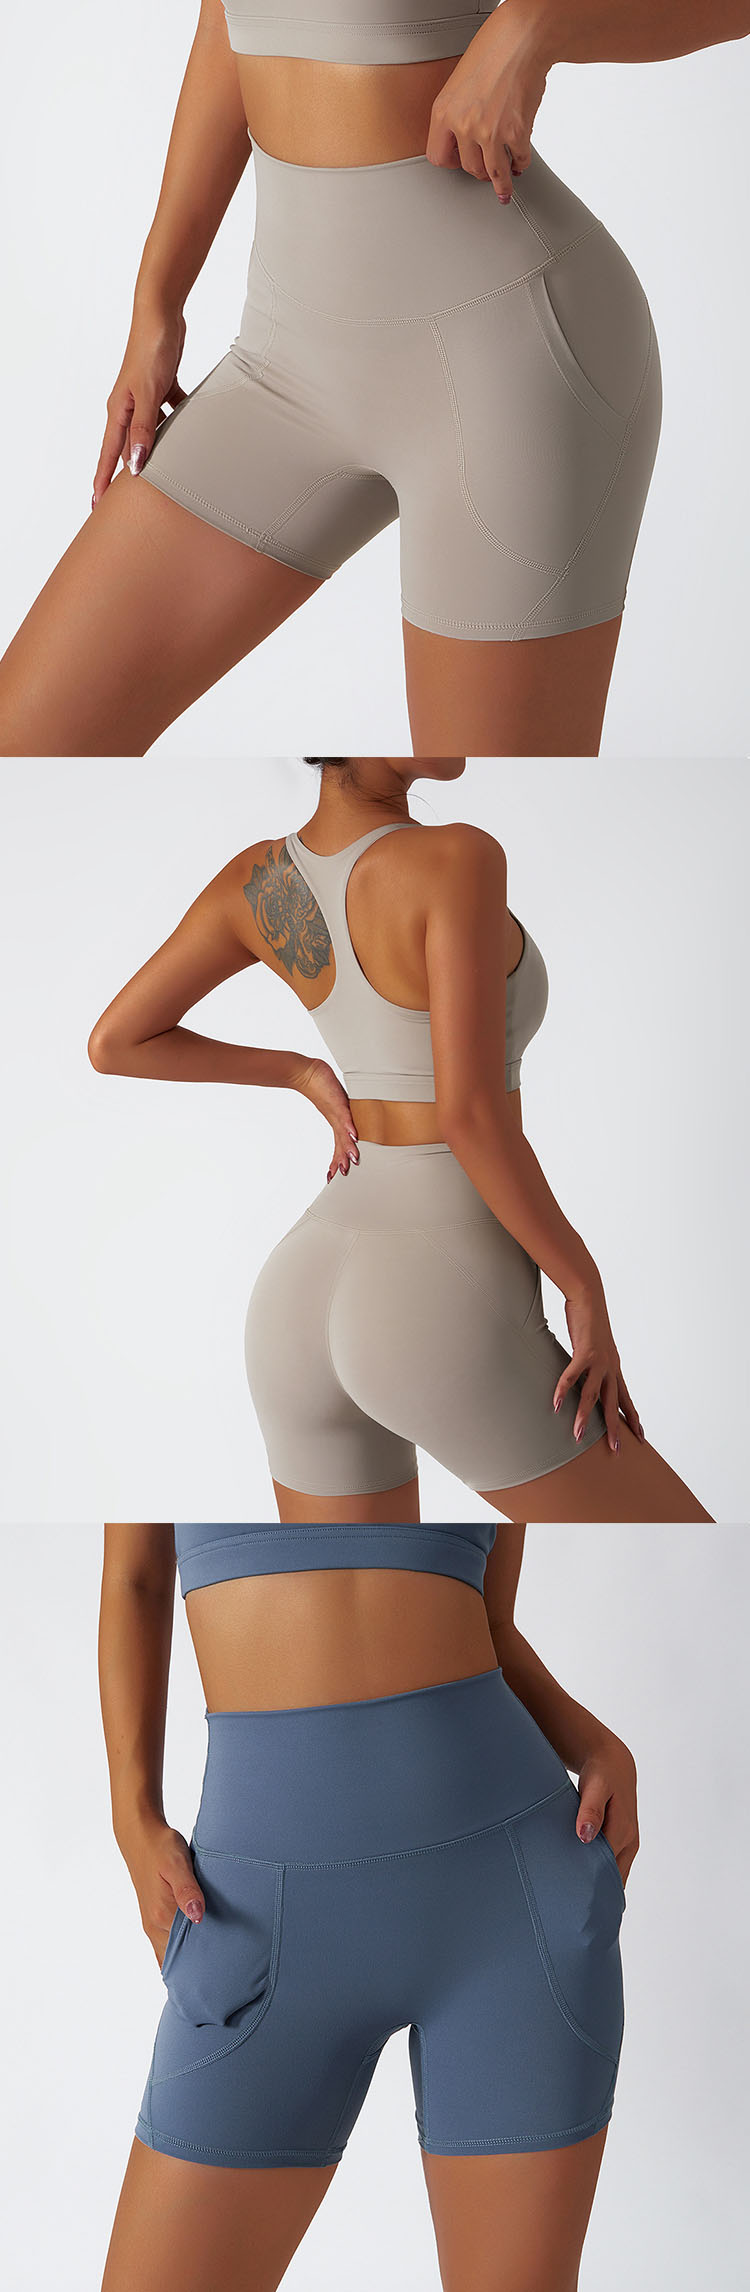 The use of hip design, highlighting the sexy peach buttocks, showing charming and confident parts